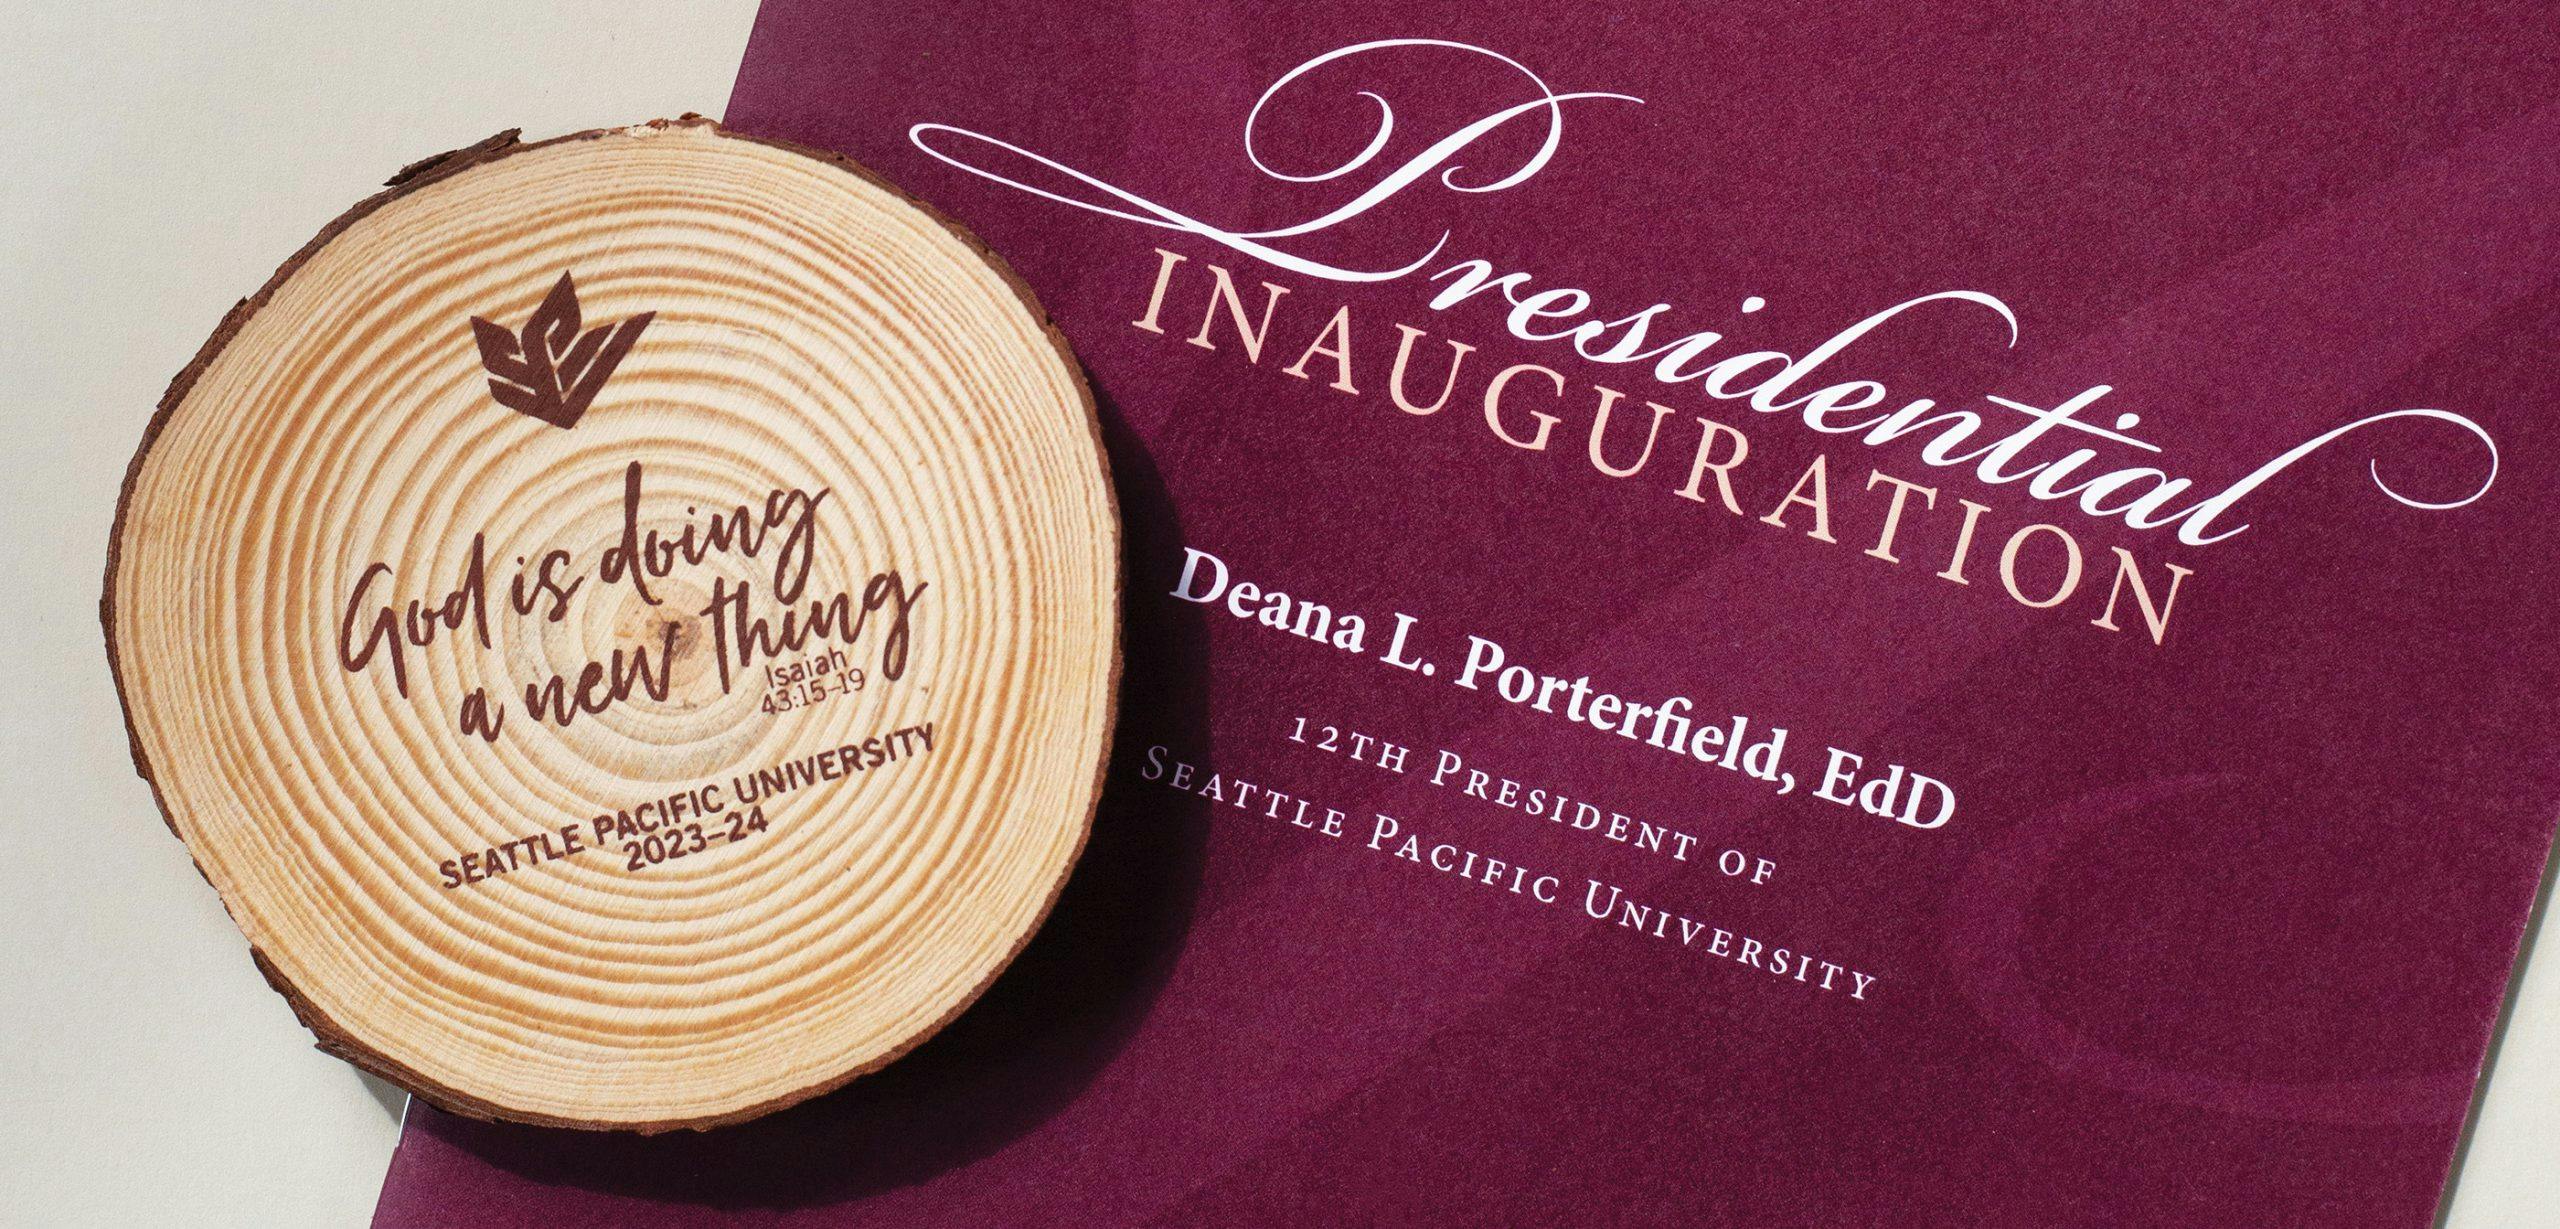 A wooden coaster sits on a program from Dr. Deana L. Porterfield's inauguration. The coaster reads "God is doing a new thing (Isaiah 43:15-19) Seattle Pacific University 2023-24